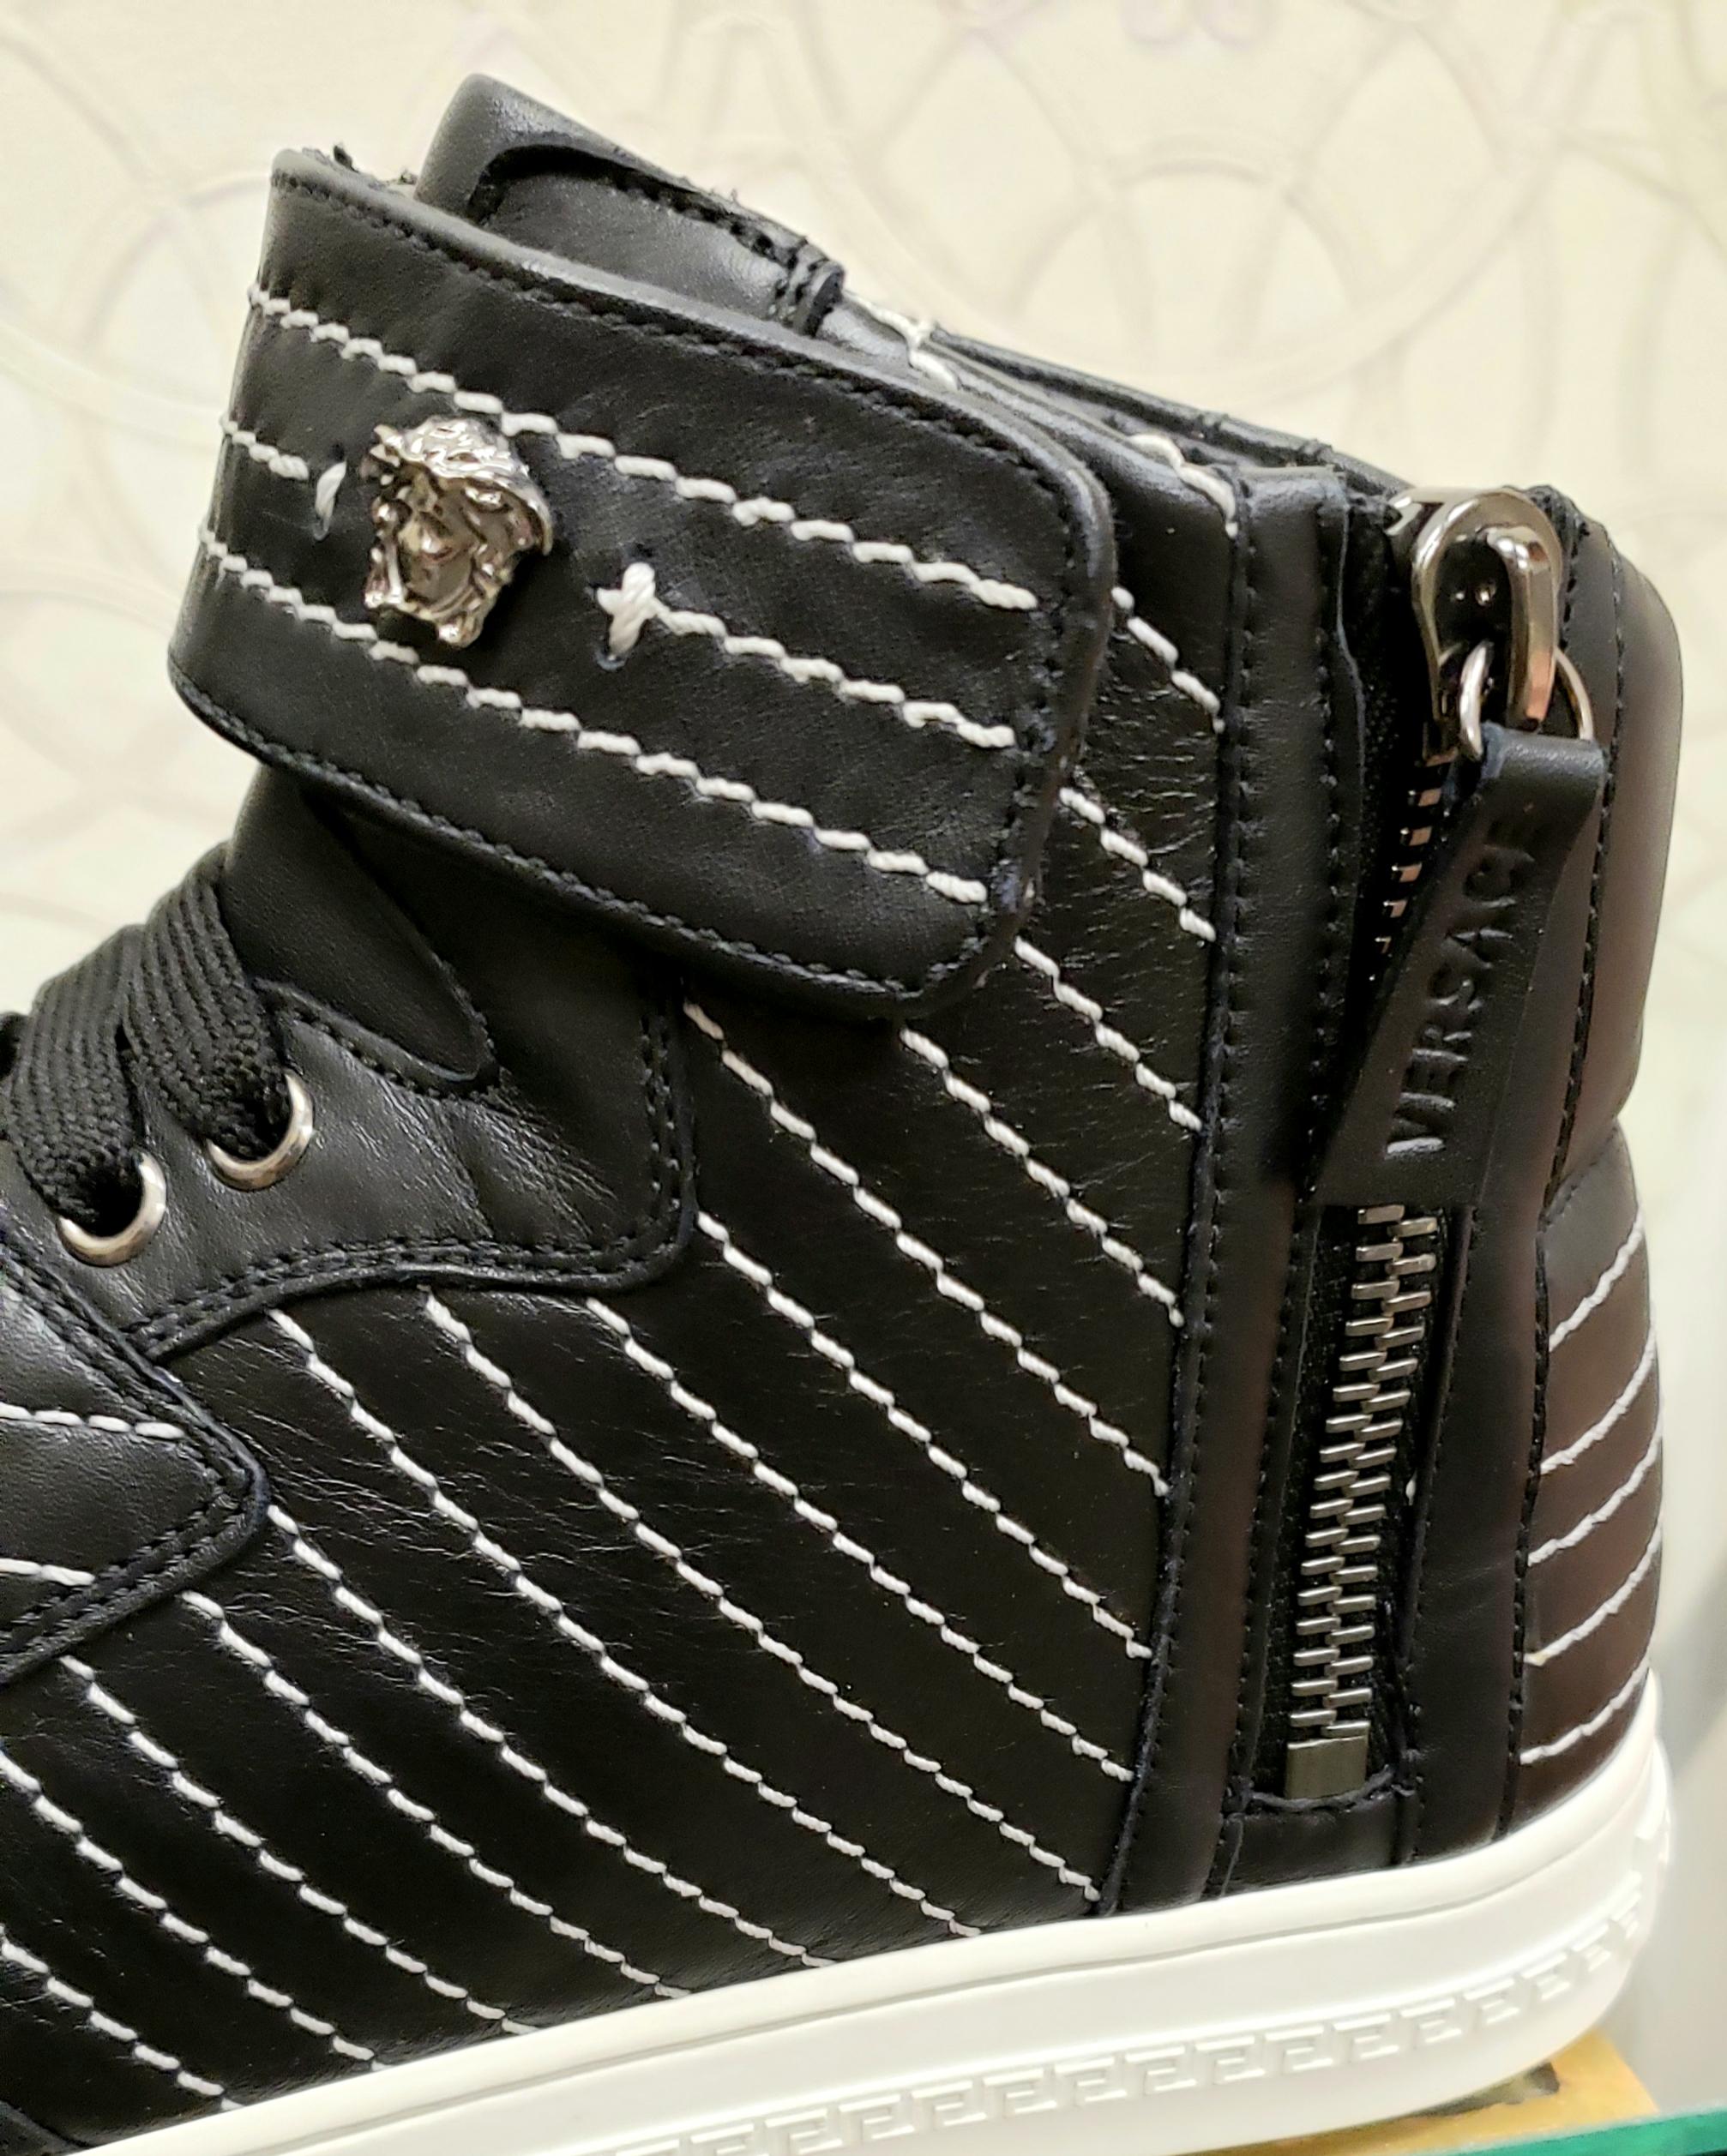 Men's NEW VERSACE STUDDED HIGH-TOP SNEAKERS with SILVER MEDUSA side ZIPPER 41 - 8